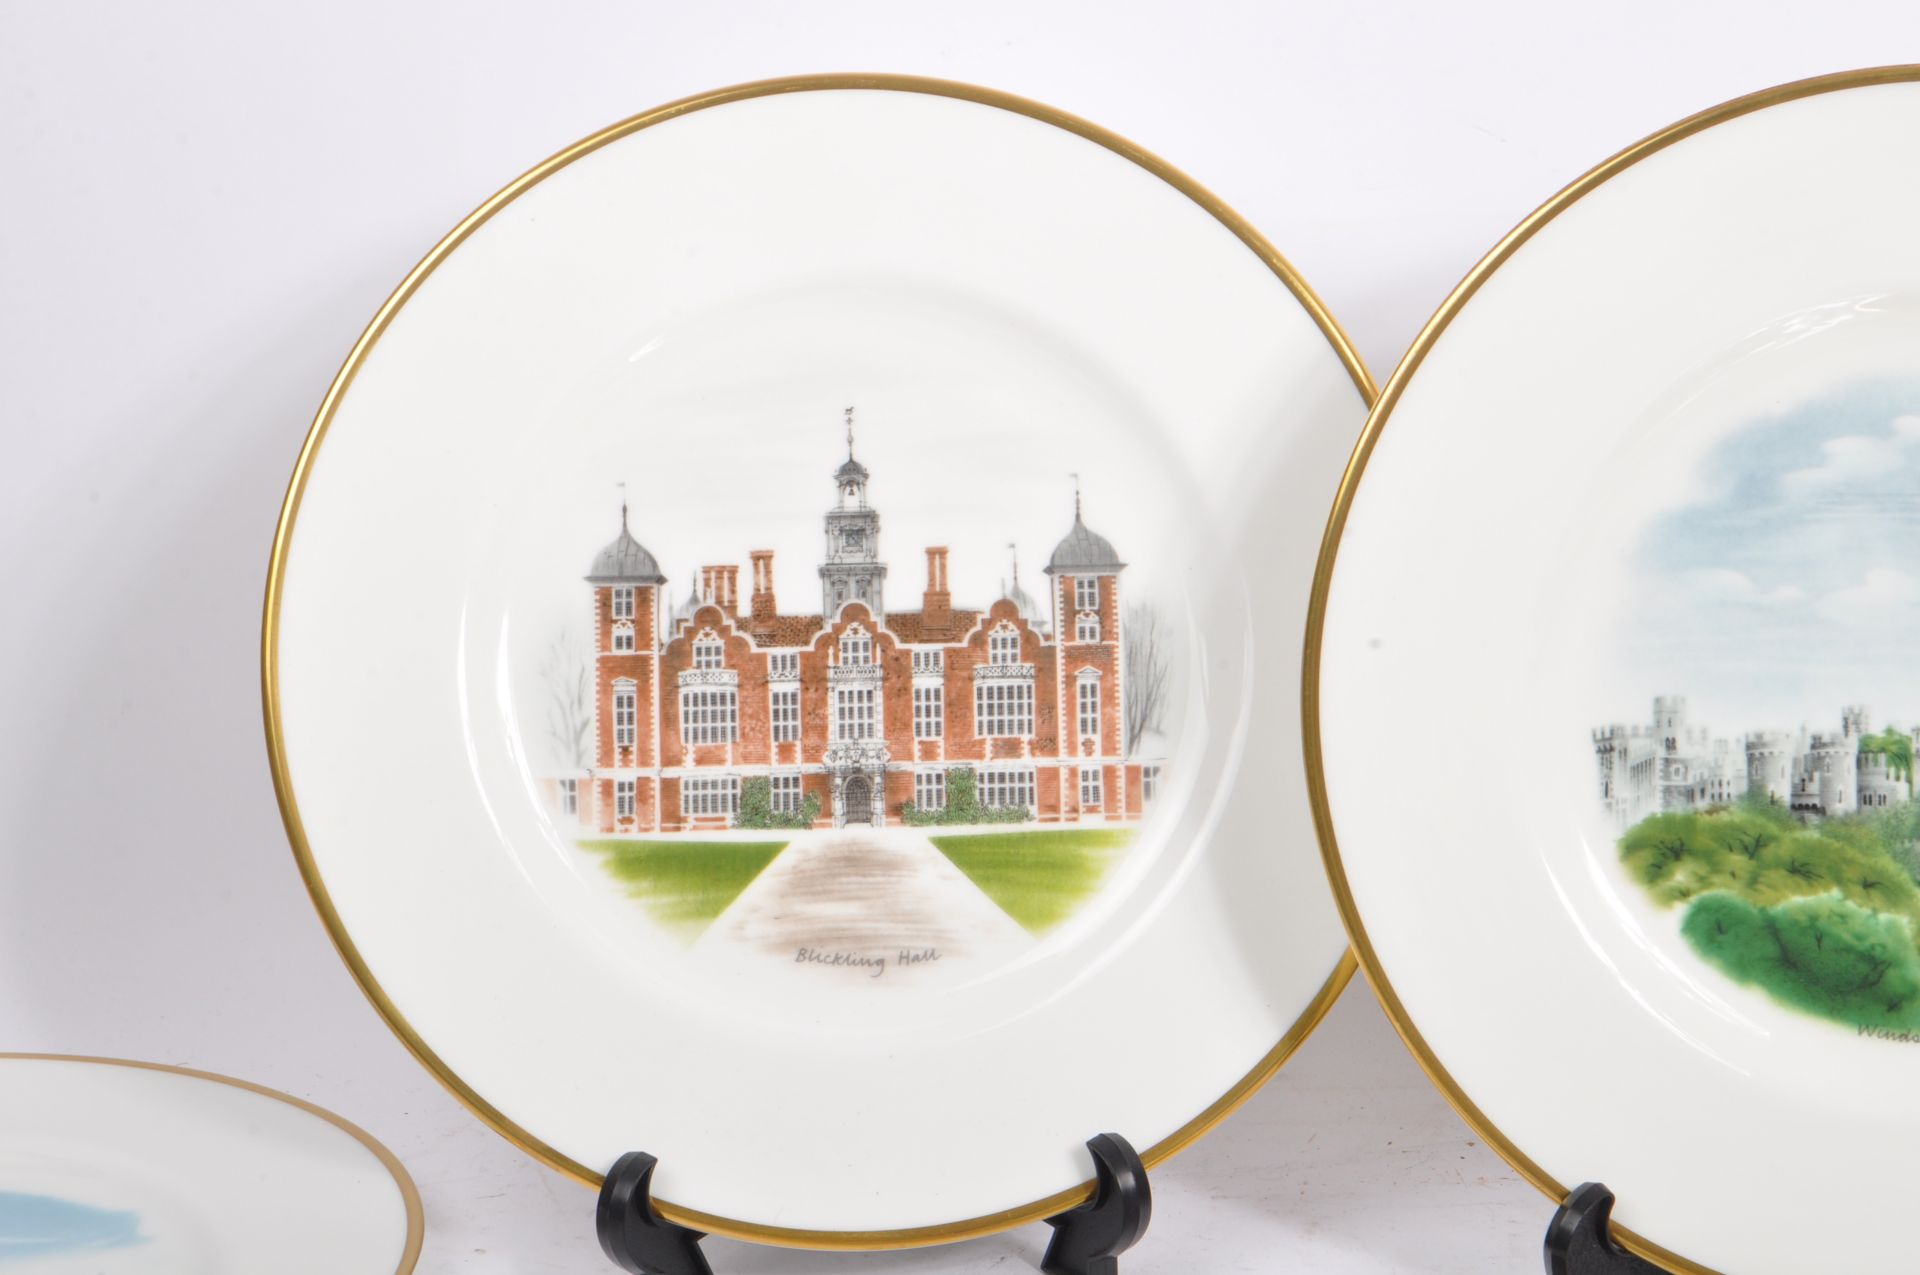 WEDGWOOD - CASTLE & COUNTRY HOUSE PORCELAIN PLATES - Image 2 of 11